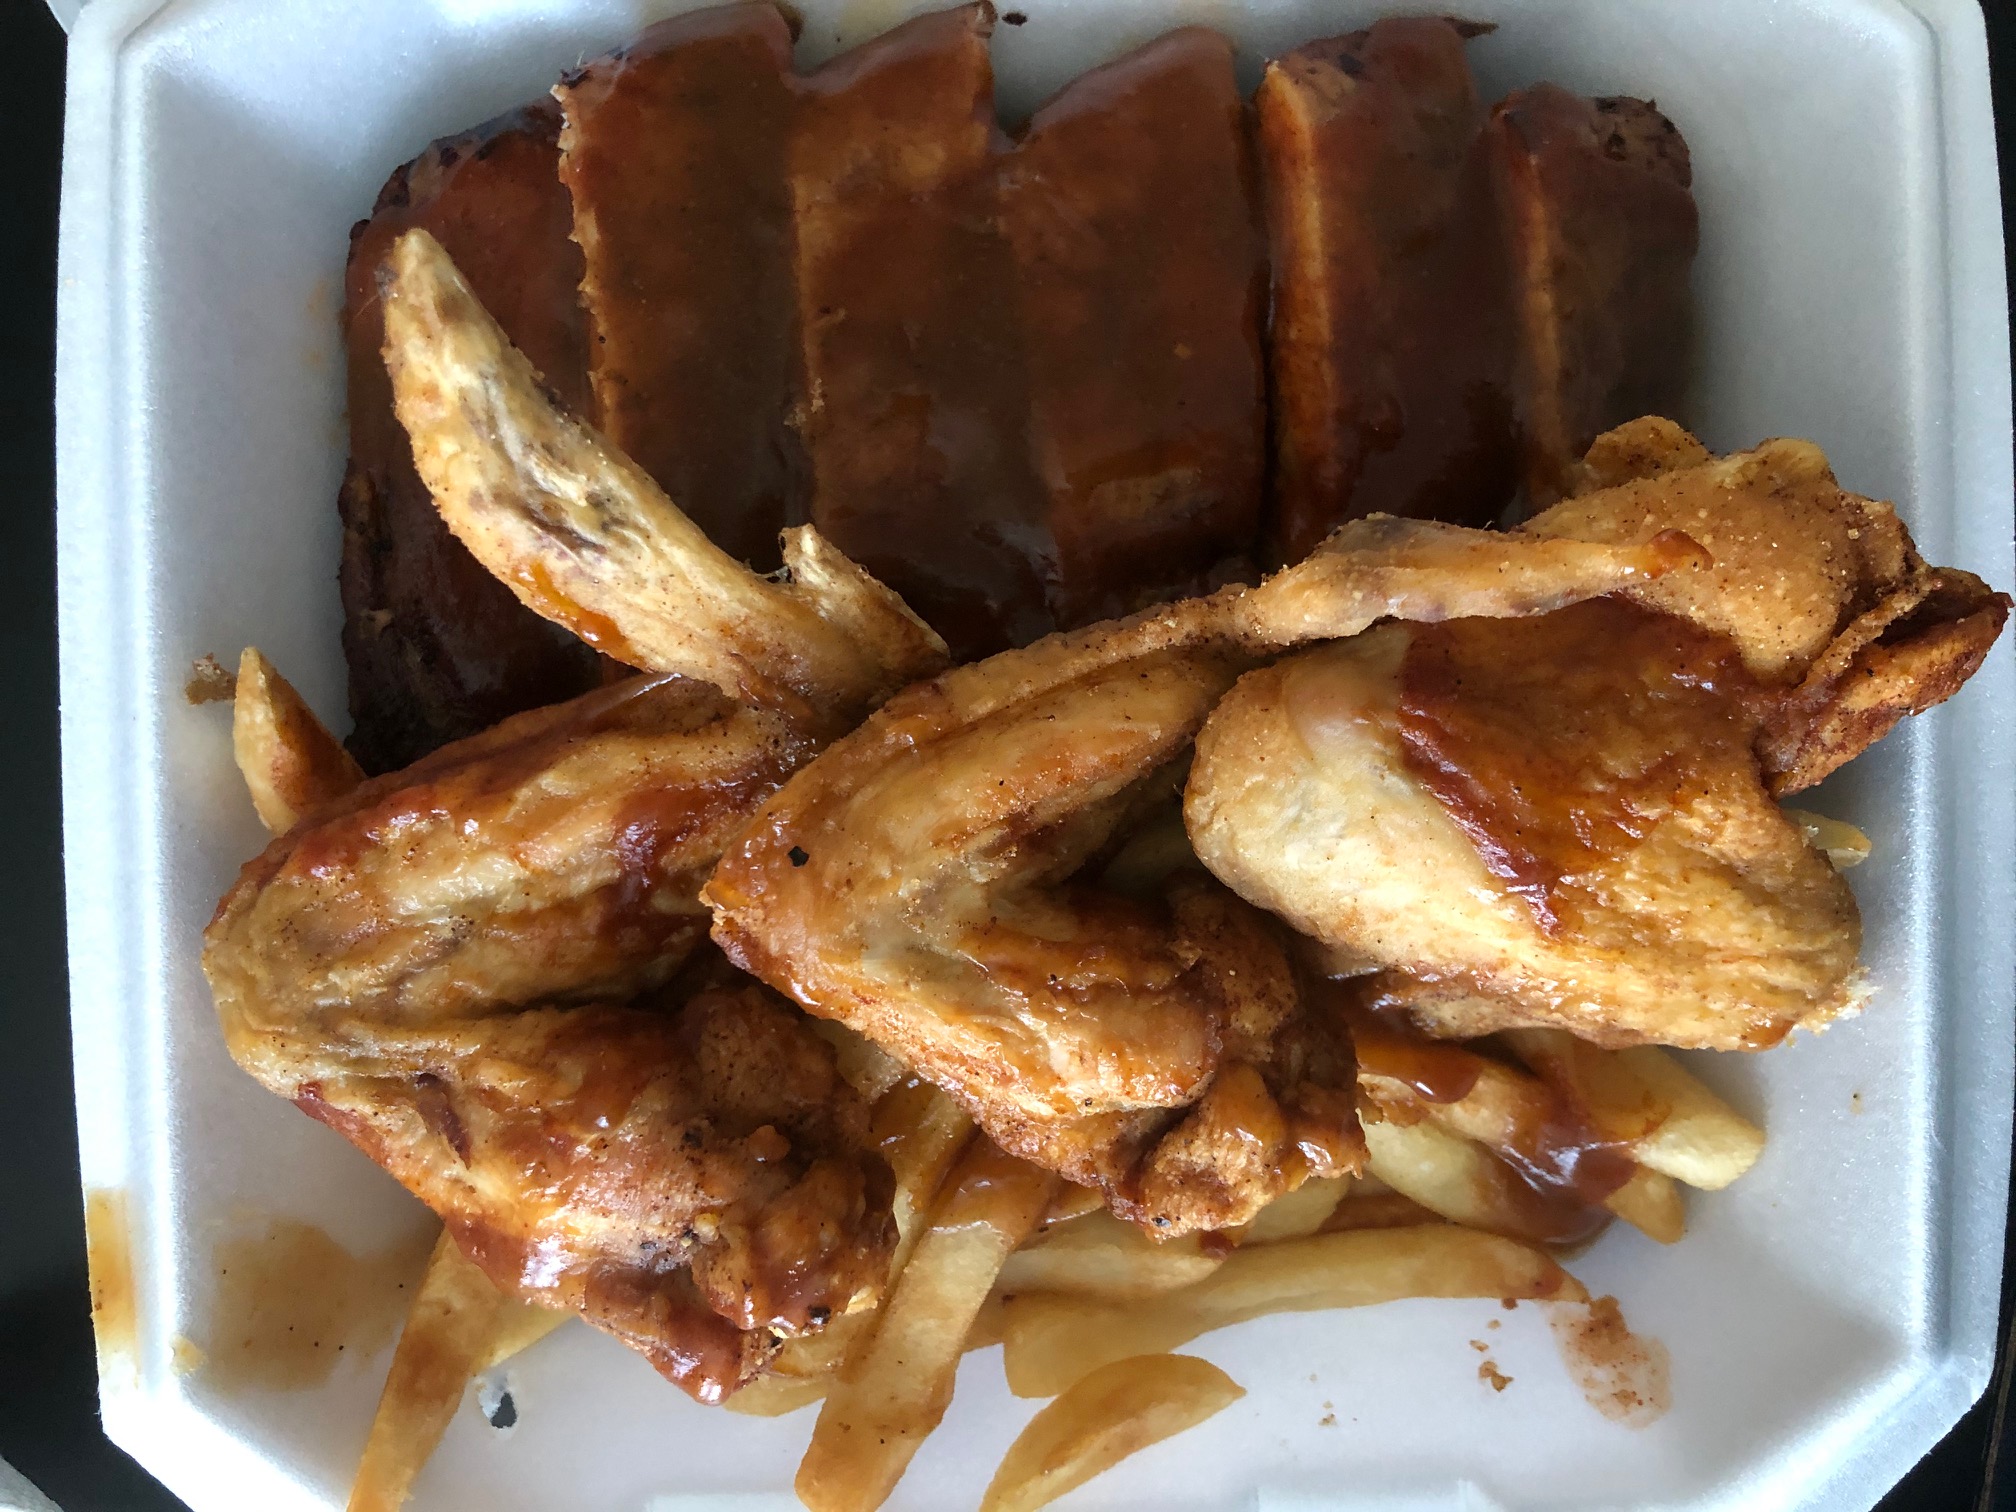 In a styrofoam container, there are three large wings over fries and a slab of ribs from Wood N Hog. Photo by Alyssa Buckley.